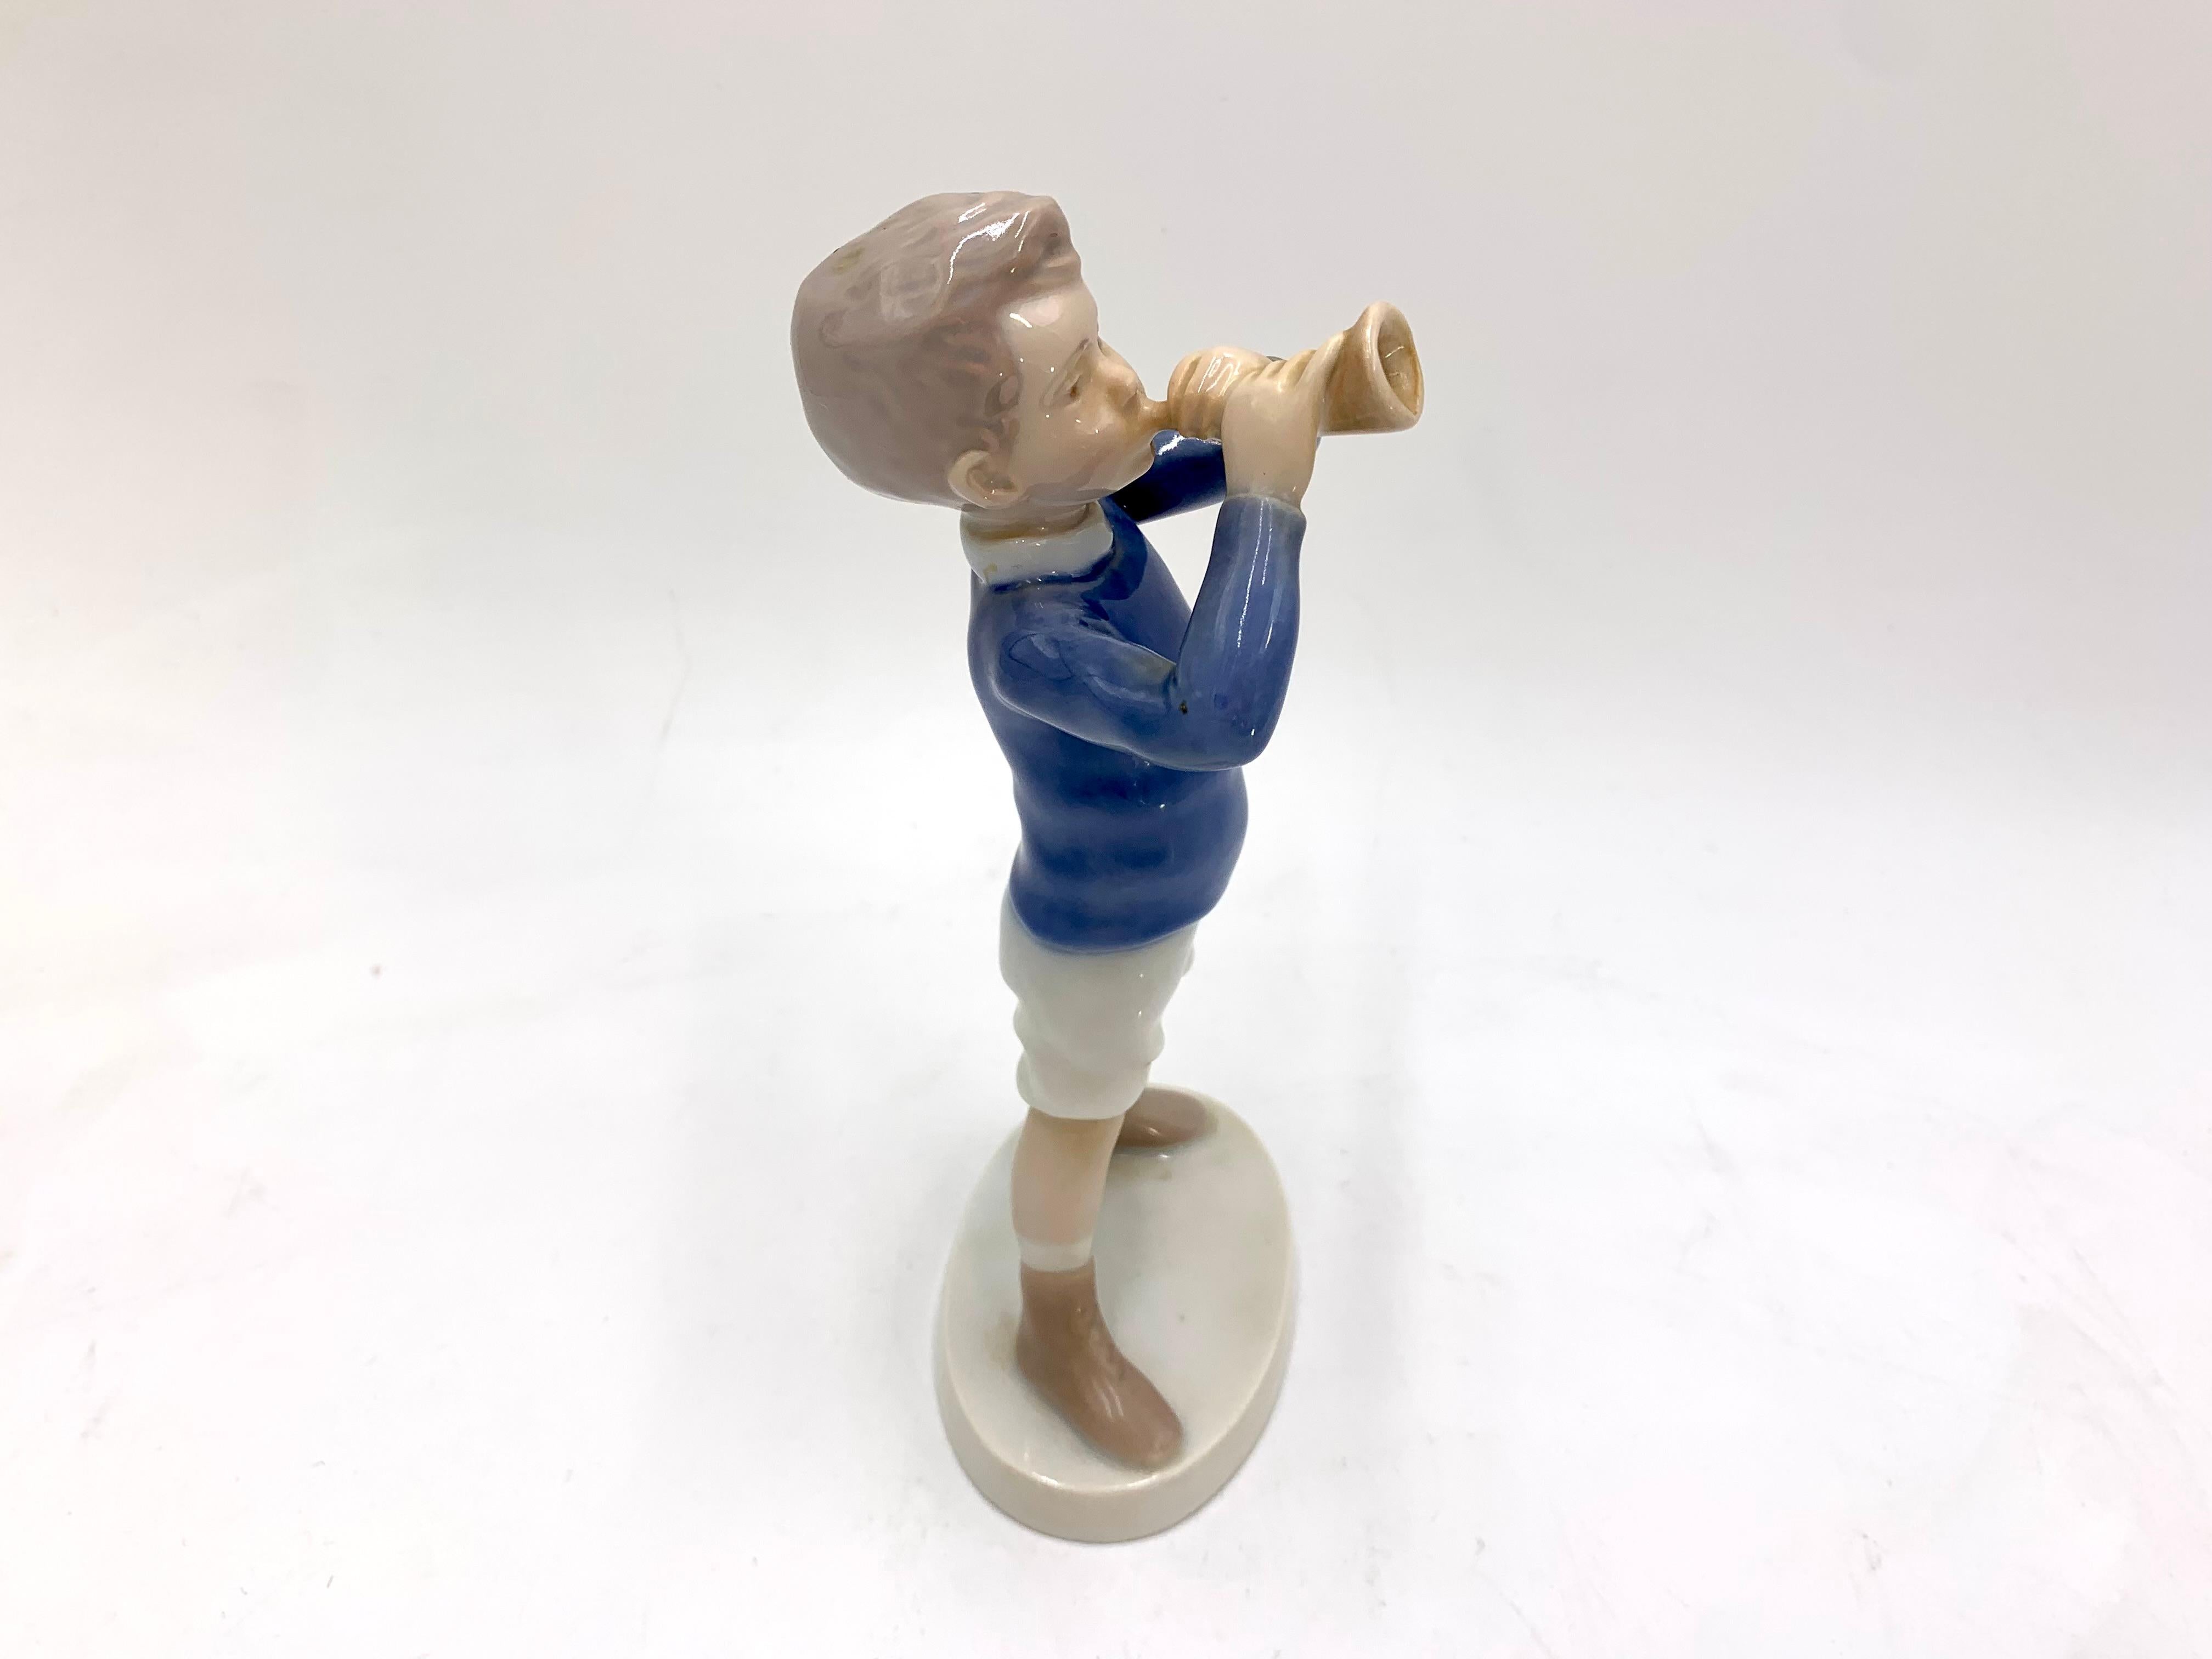 Danish Porcelain Figurine of a Boy with a Trumpet, Bing & Grondahl, Denmark, 1970s/80s For Sale